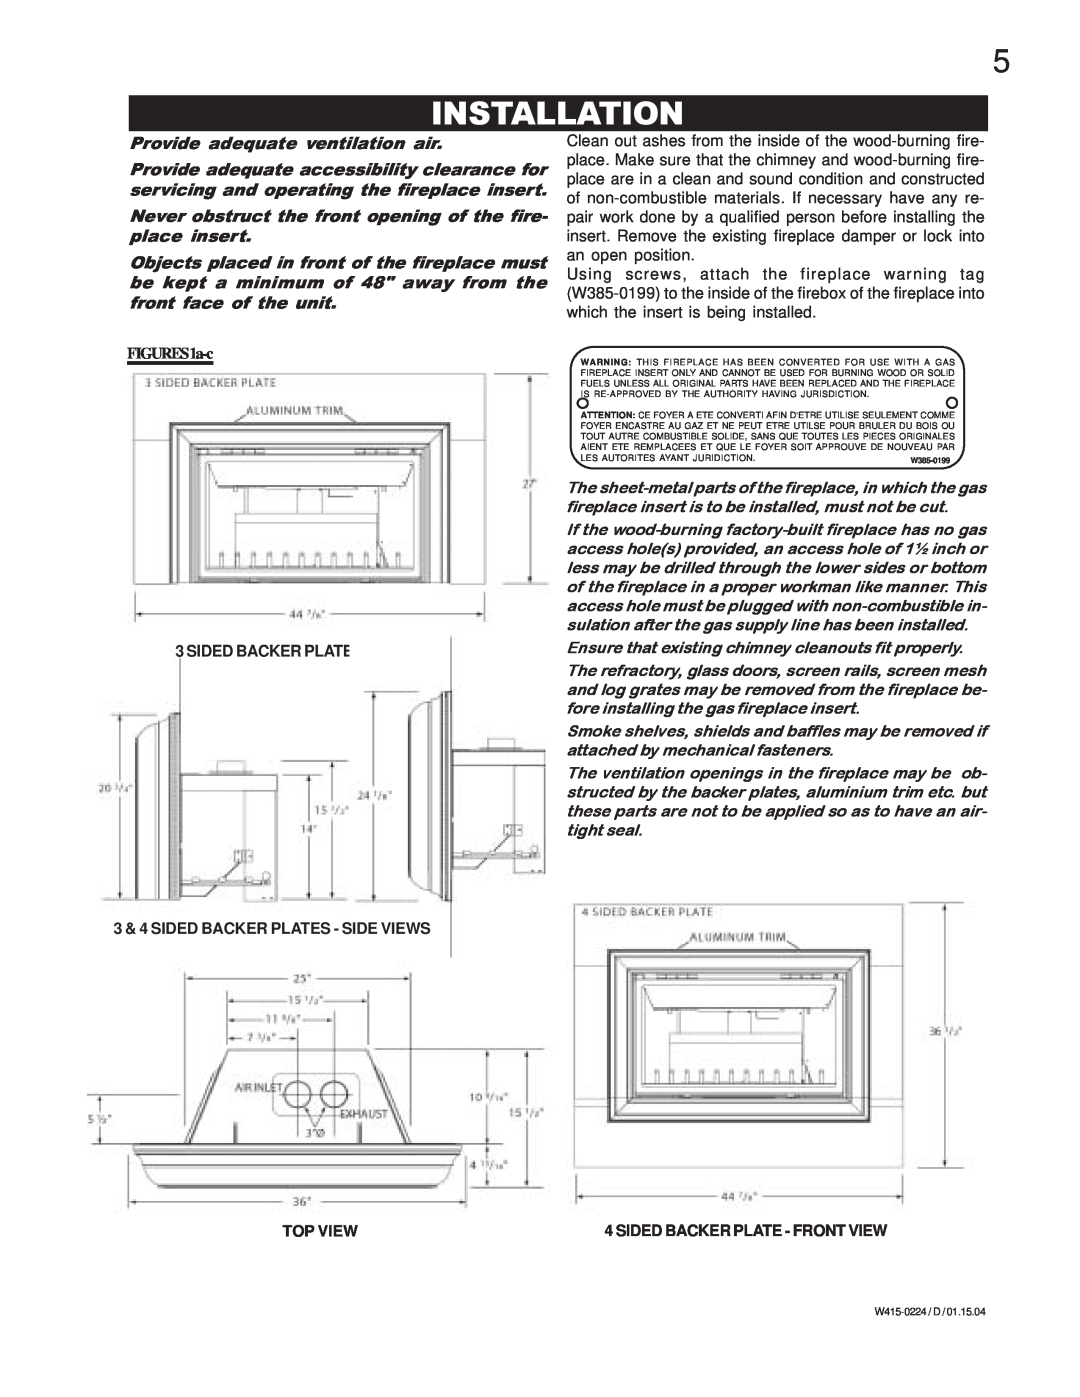 Continental CDIZC - P manual Installation, Provide adequate ventilation air, FIGURES1a-c, Sided Backer Plate - Front View 